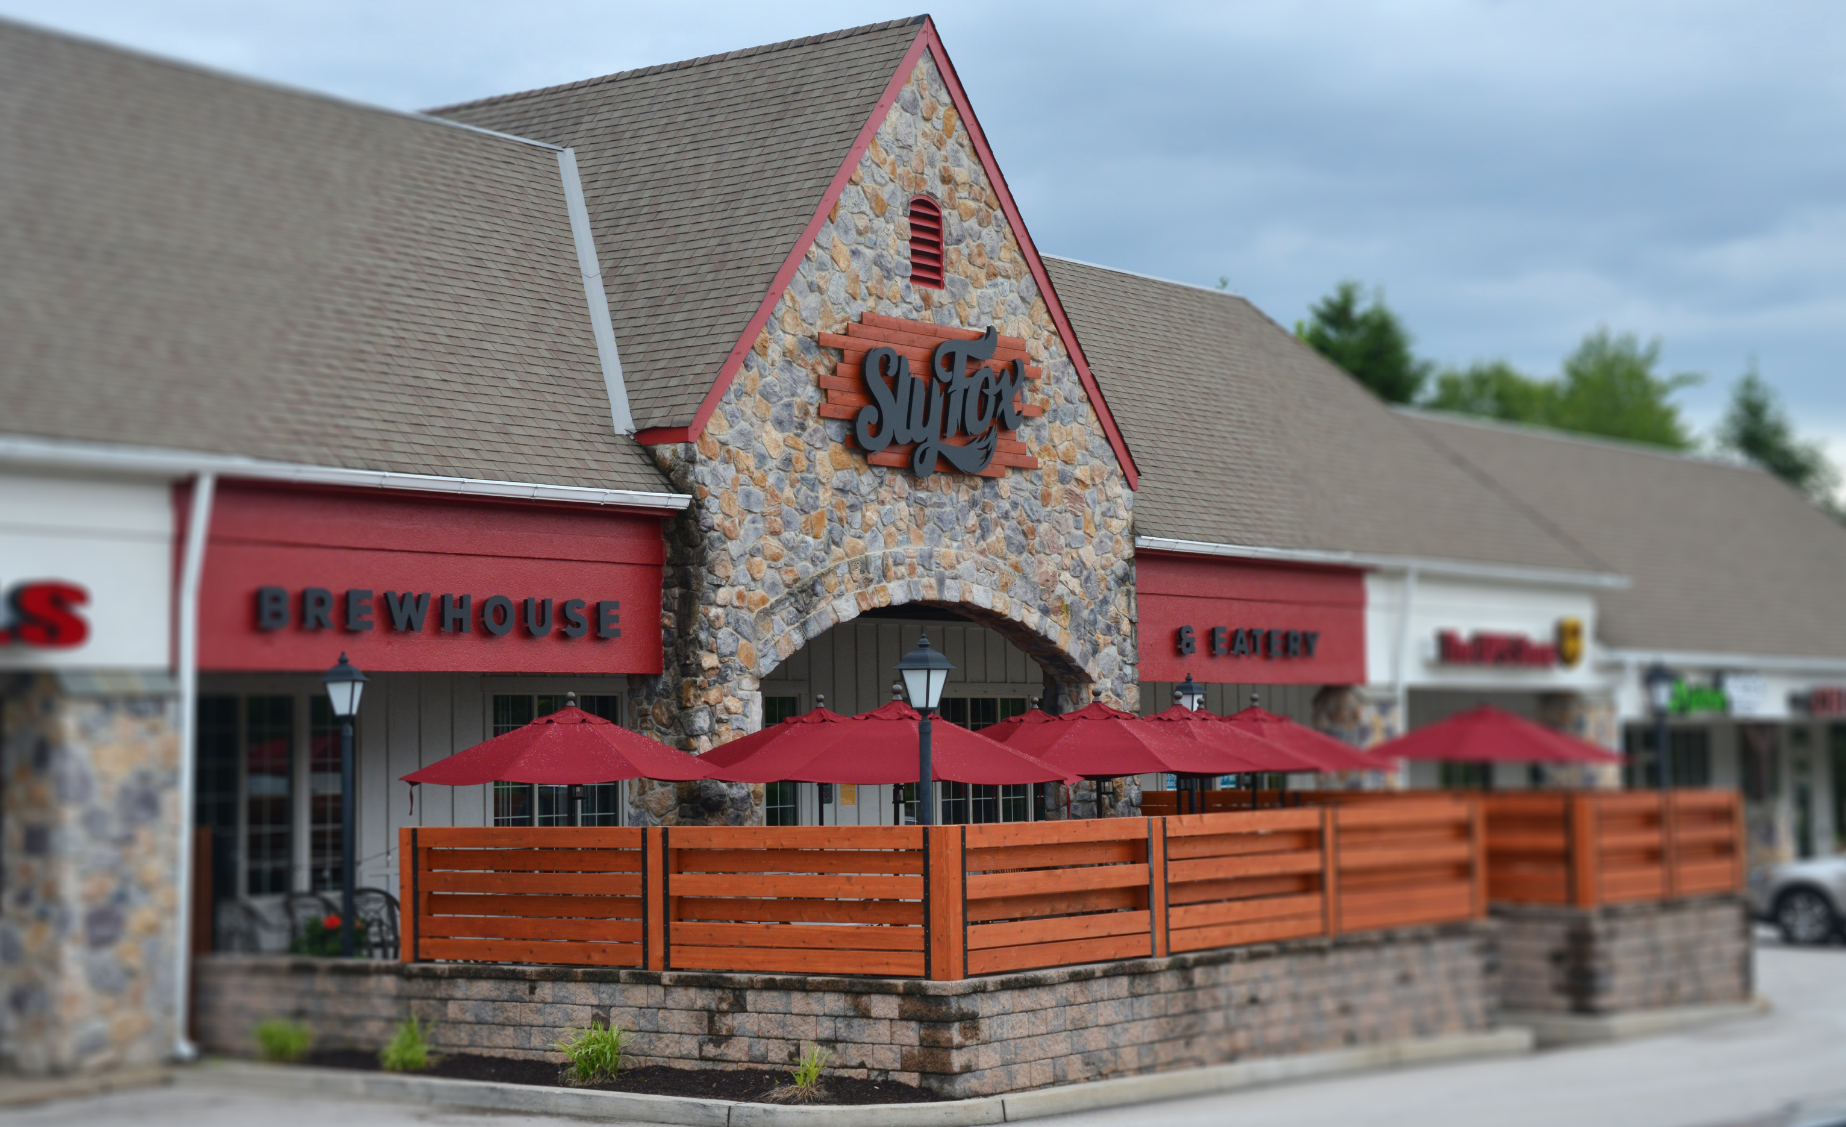 Sly Fox Brewhouse & Eatery